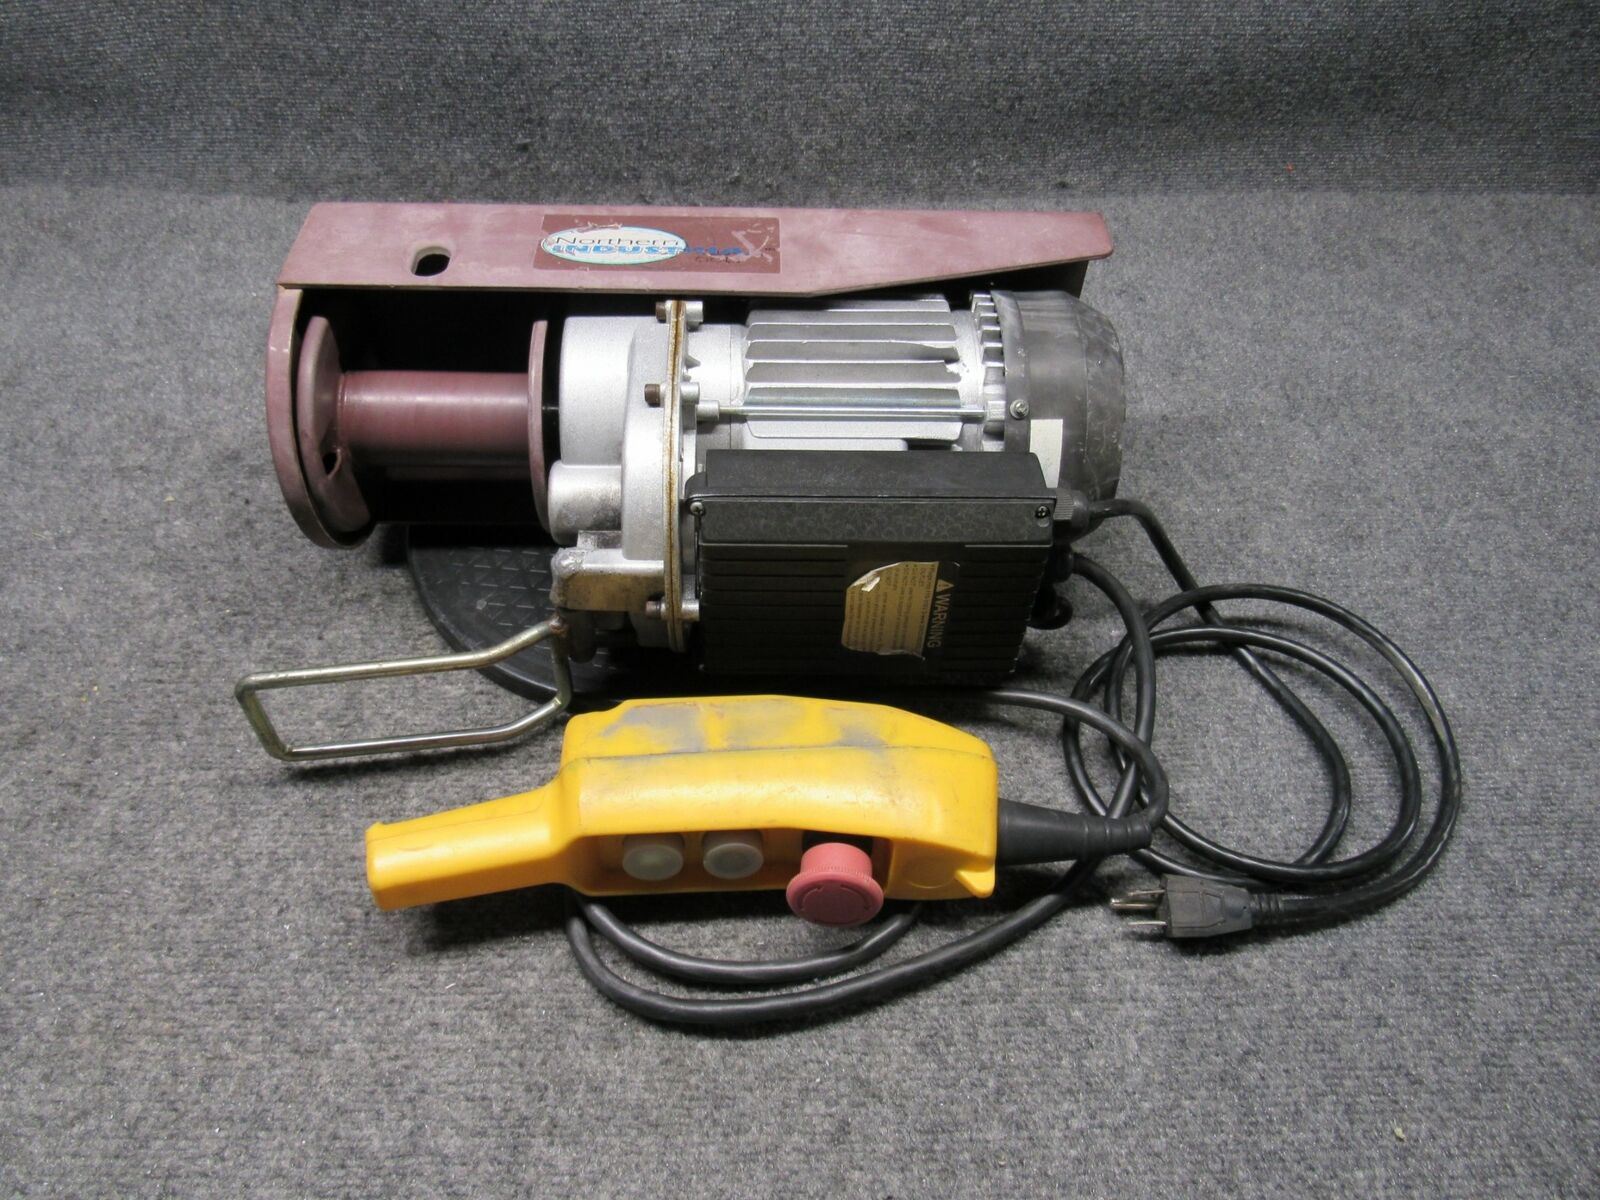 Northern Industrial Tools 15a 2hp 750/1500lb Minisize Electric Rope Hoist